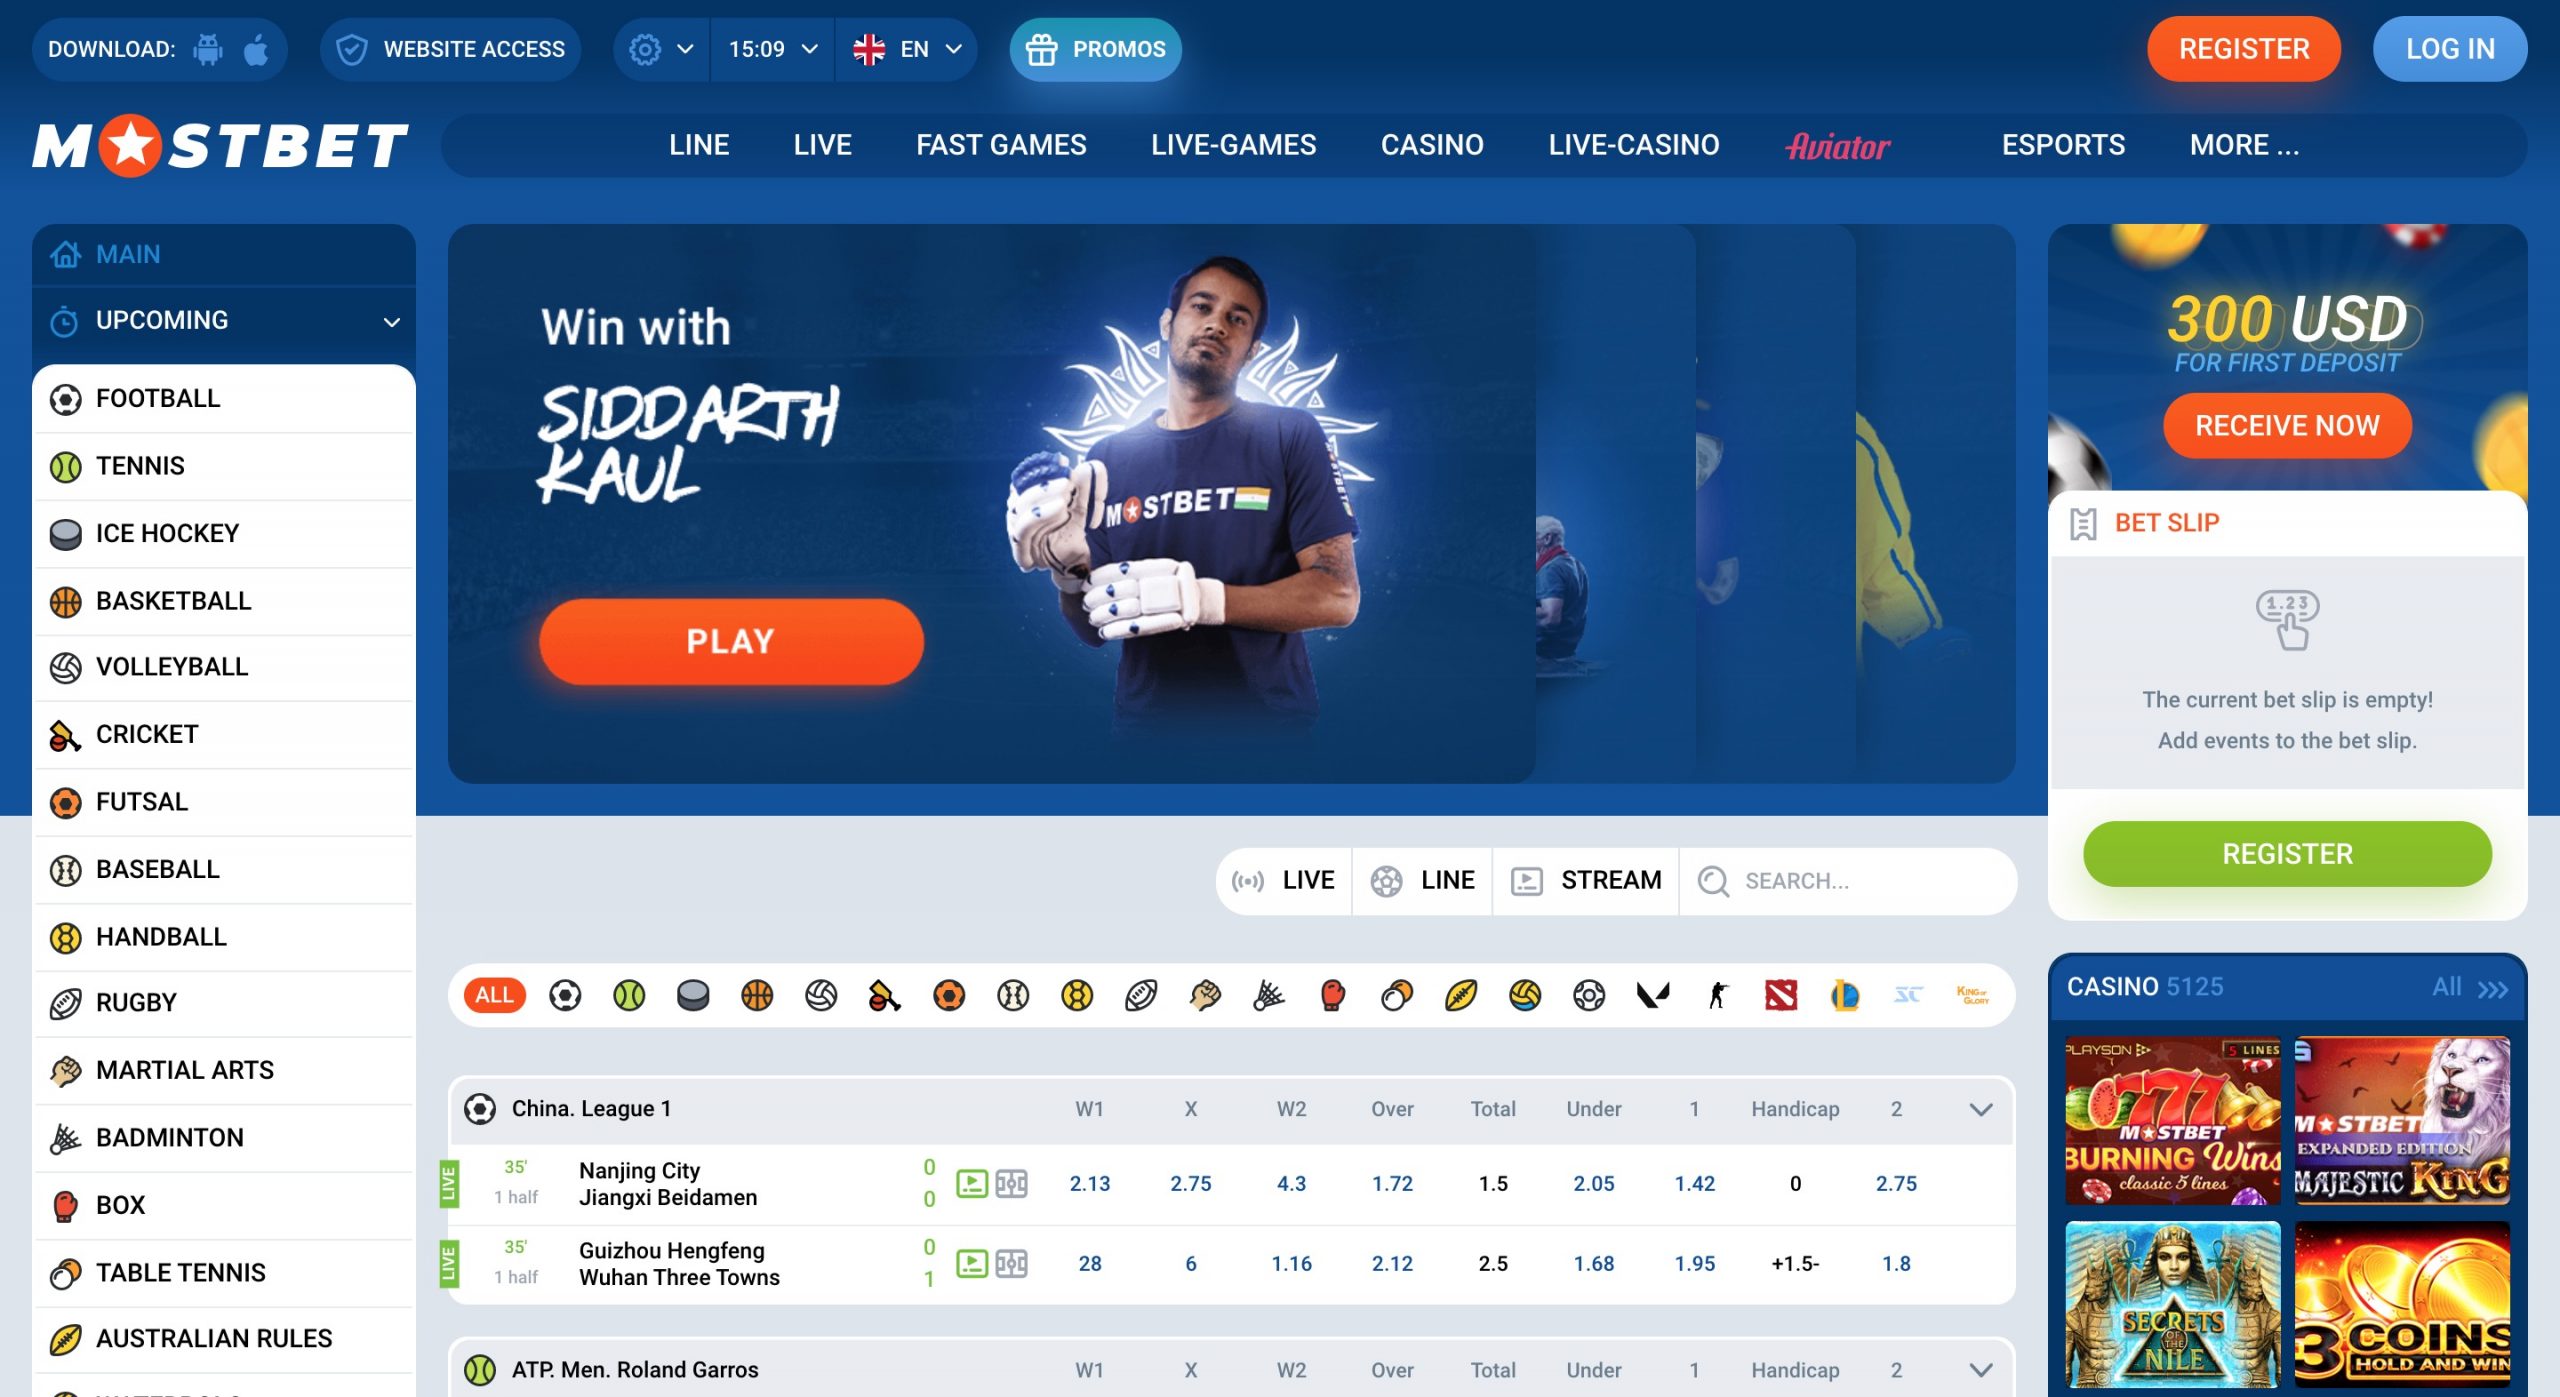 10 Questions On Mostbet UZ: Get a signup bonus and more